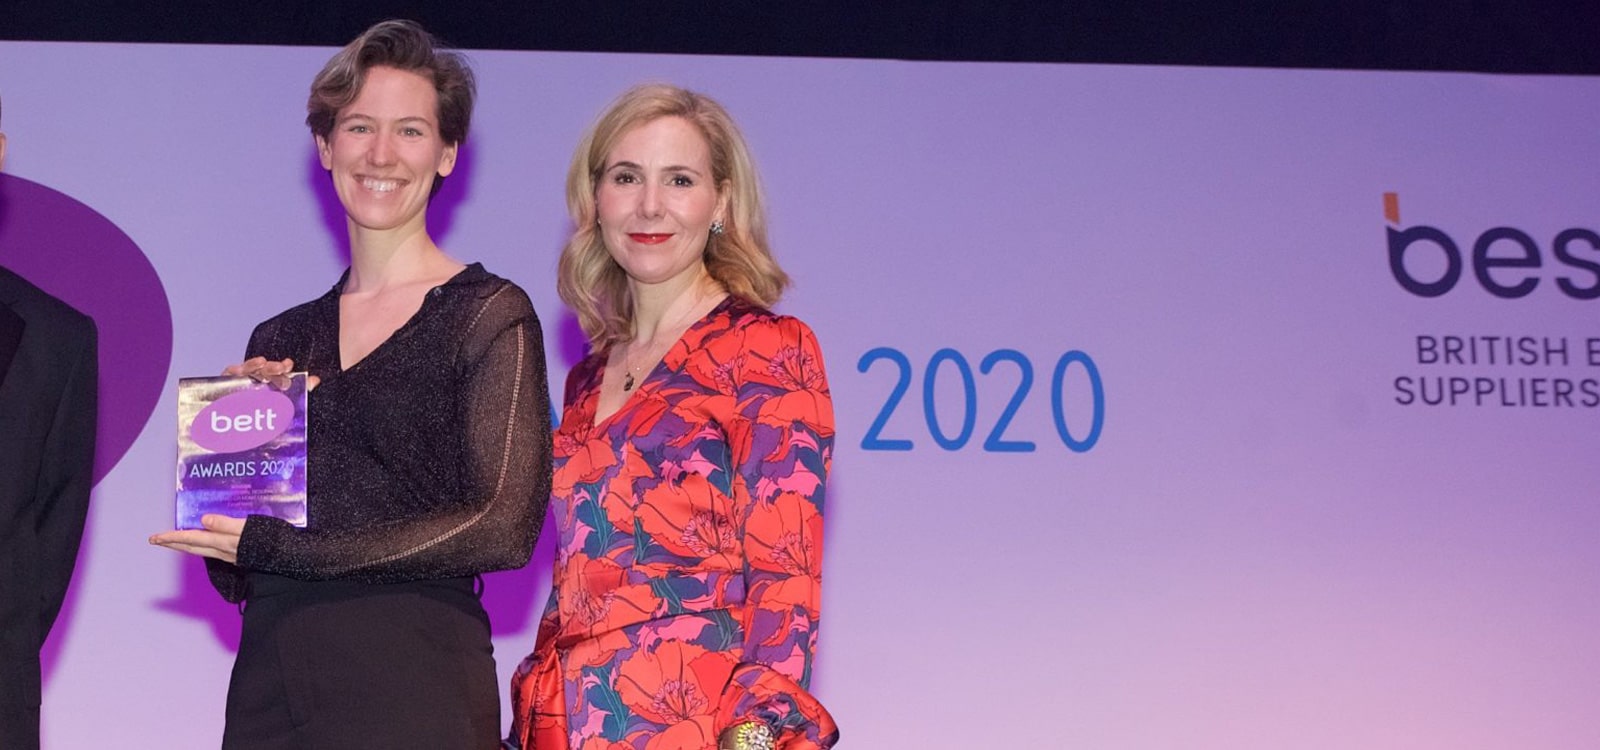 Photo of Jen Lexmond from EasyPeasy collecting the 2020 Bett Award for Best Resource for Parents & Home Learning from actress Sally Phillips